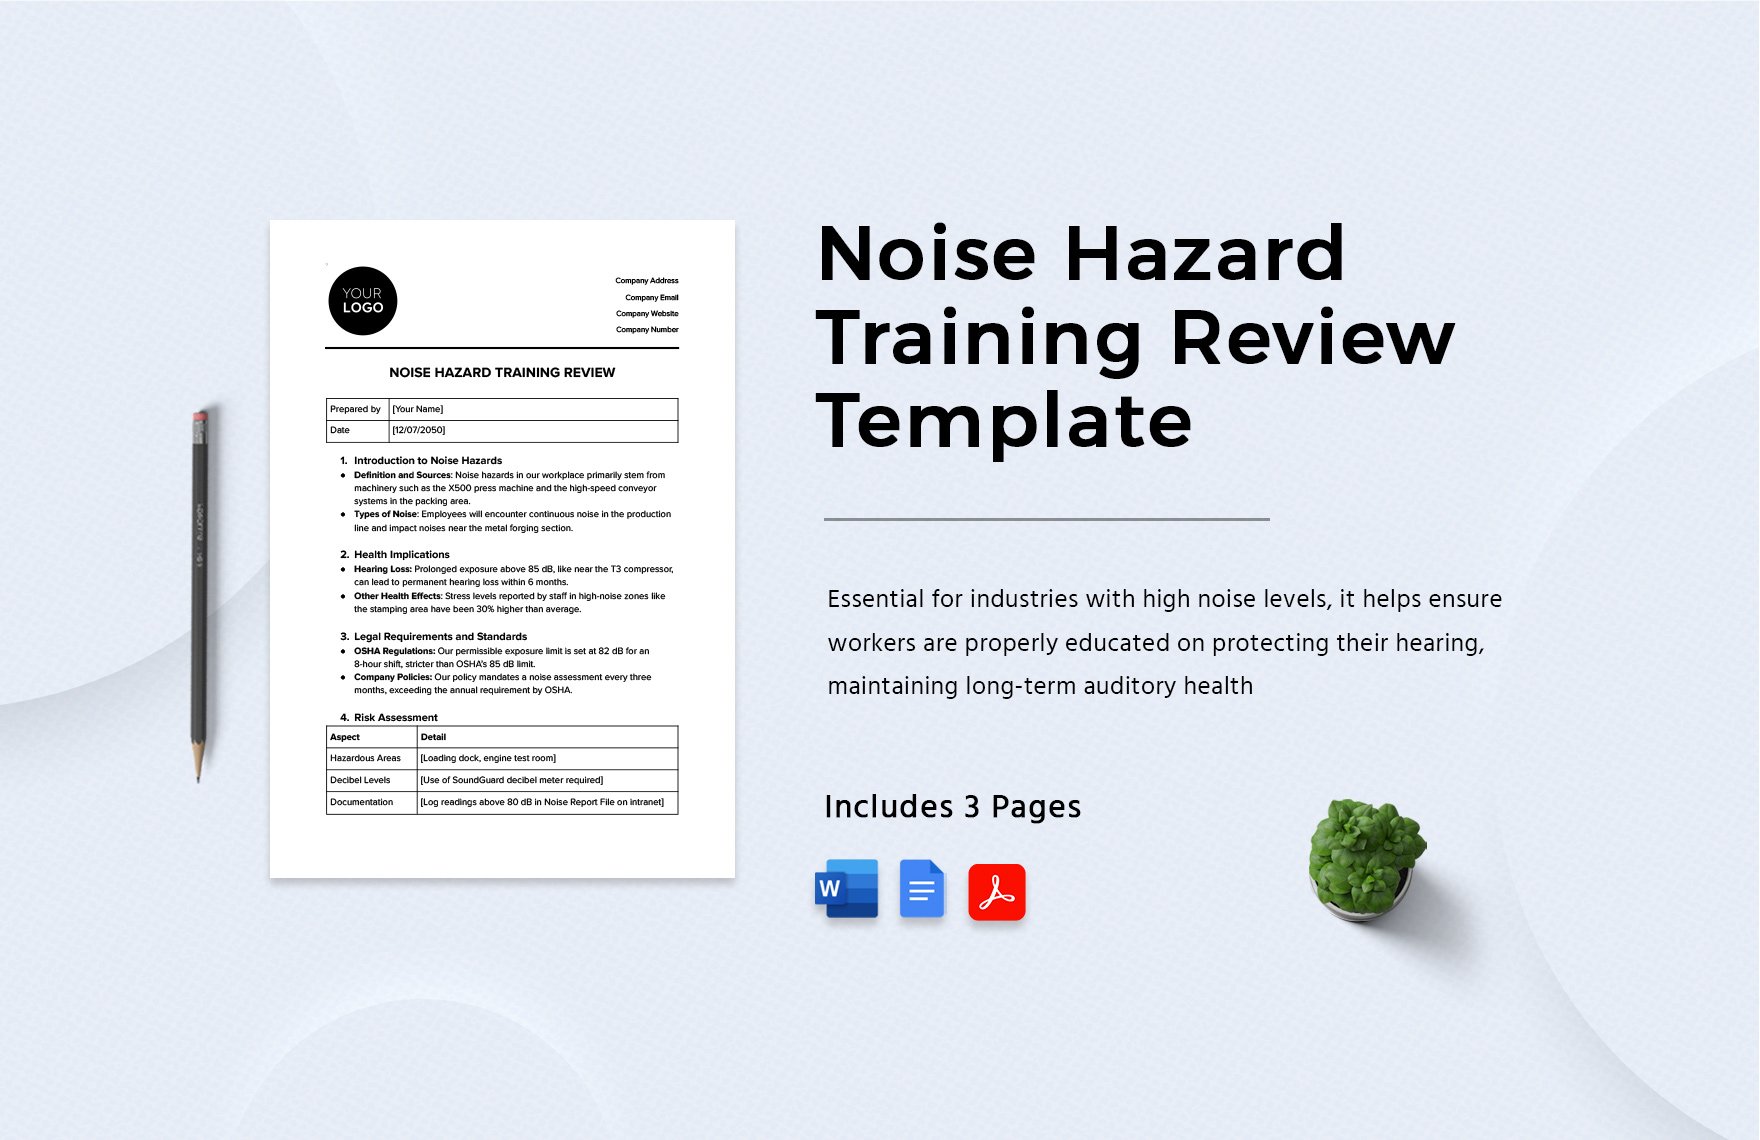 Noise Hazard Training Review Template